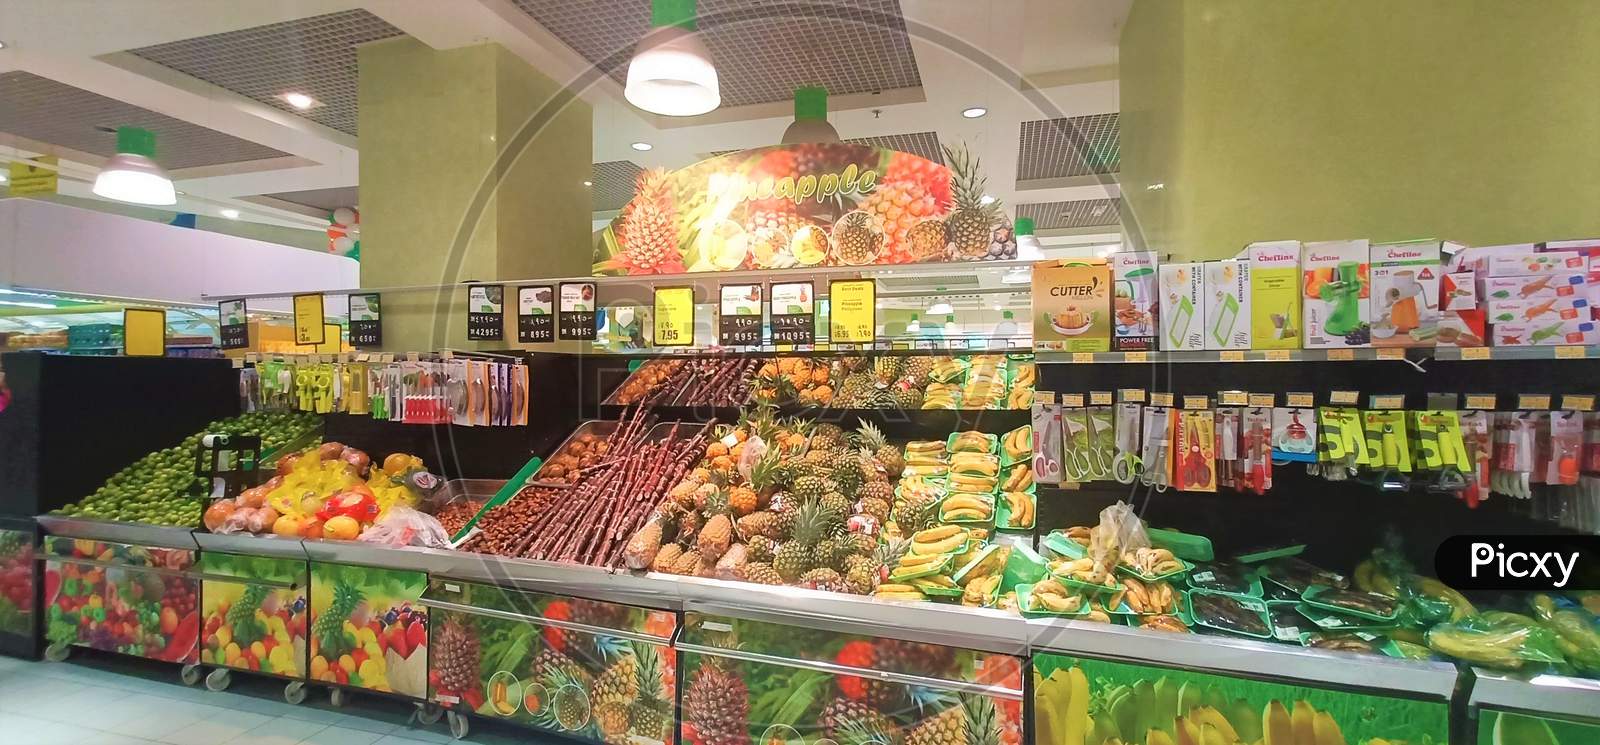 Fruits Up For Sale In A Retail Outlet